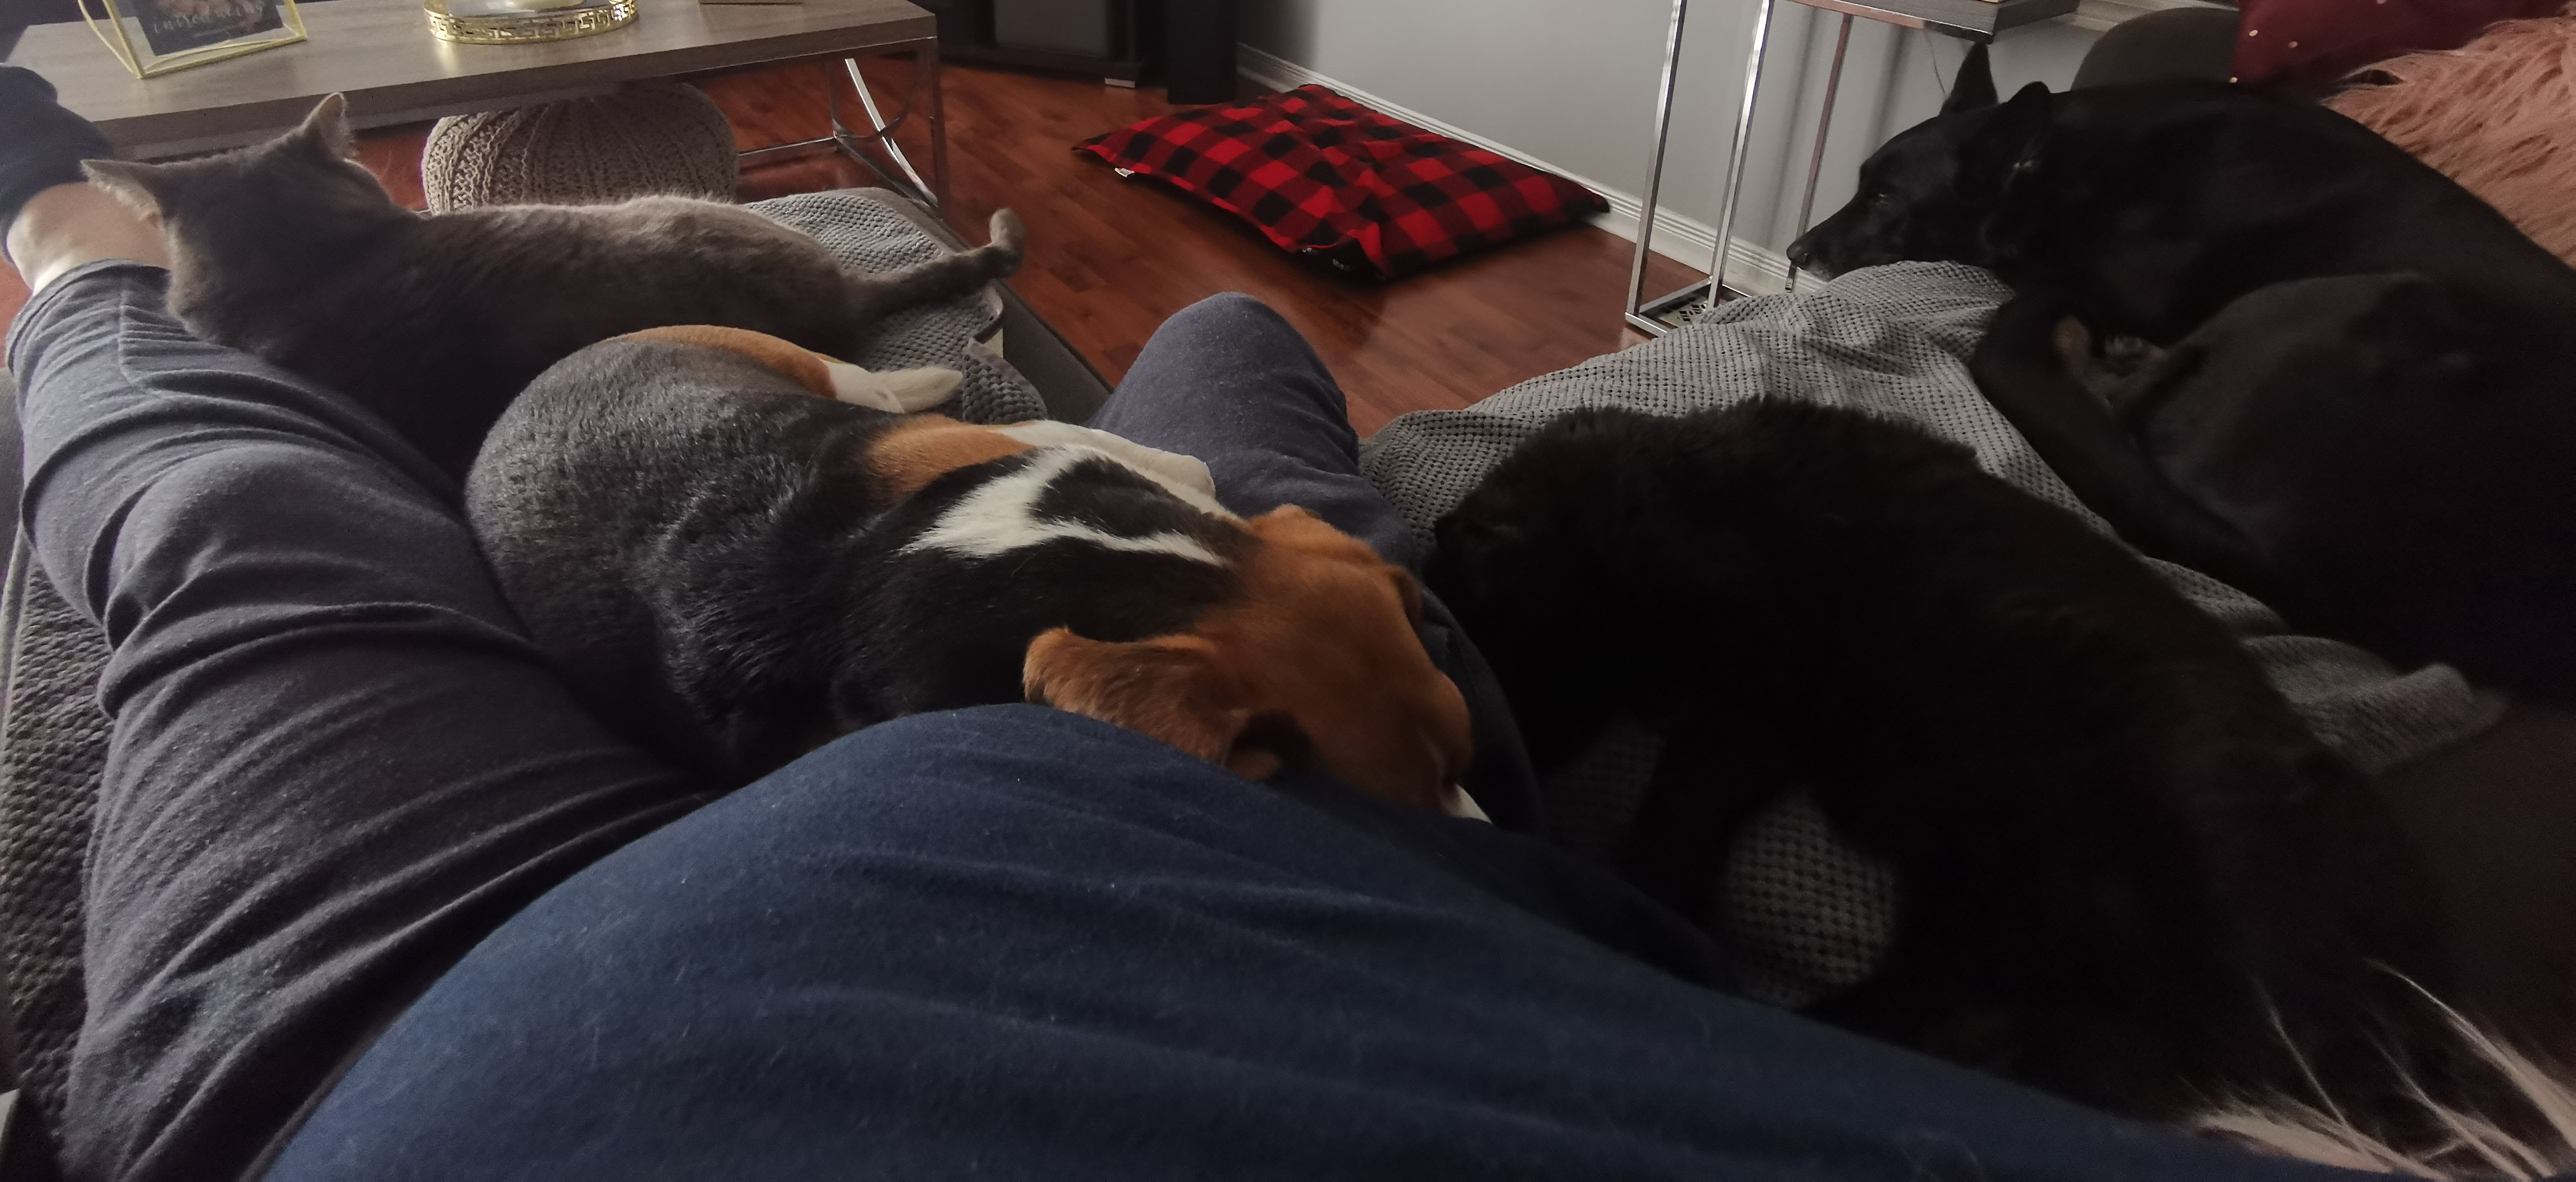 All four of my Fur Babies relaxing with me on the sofa. - Jason Piroochi